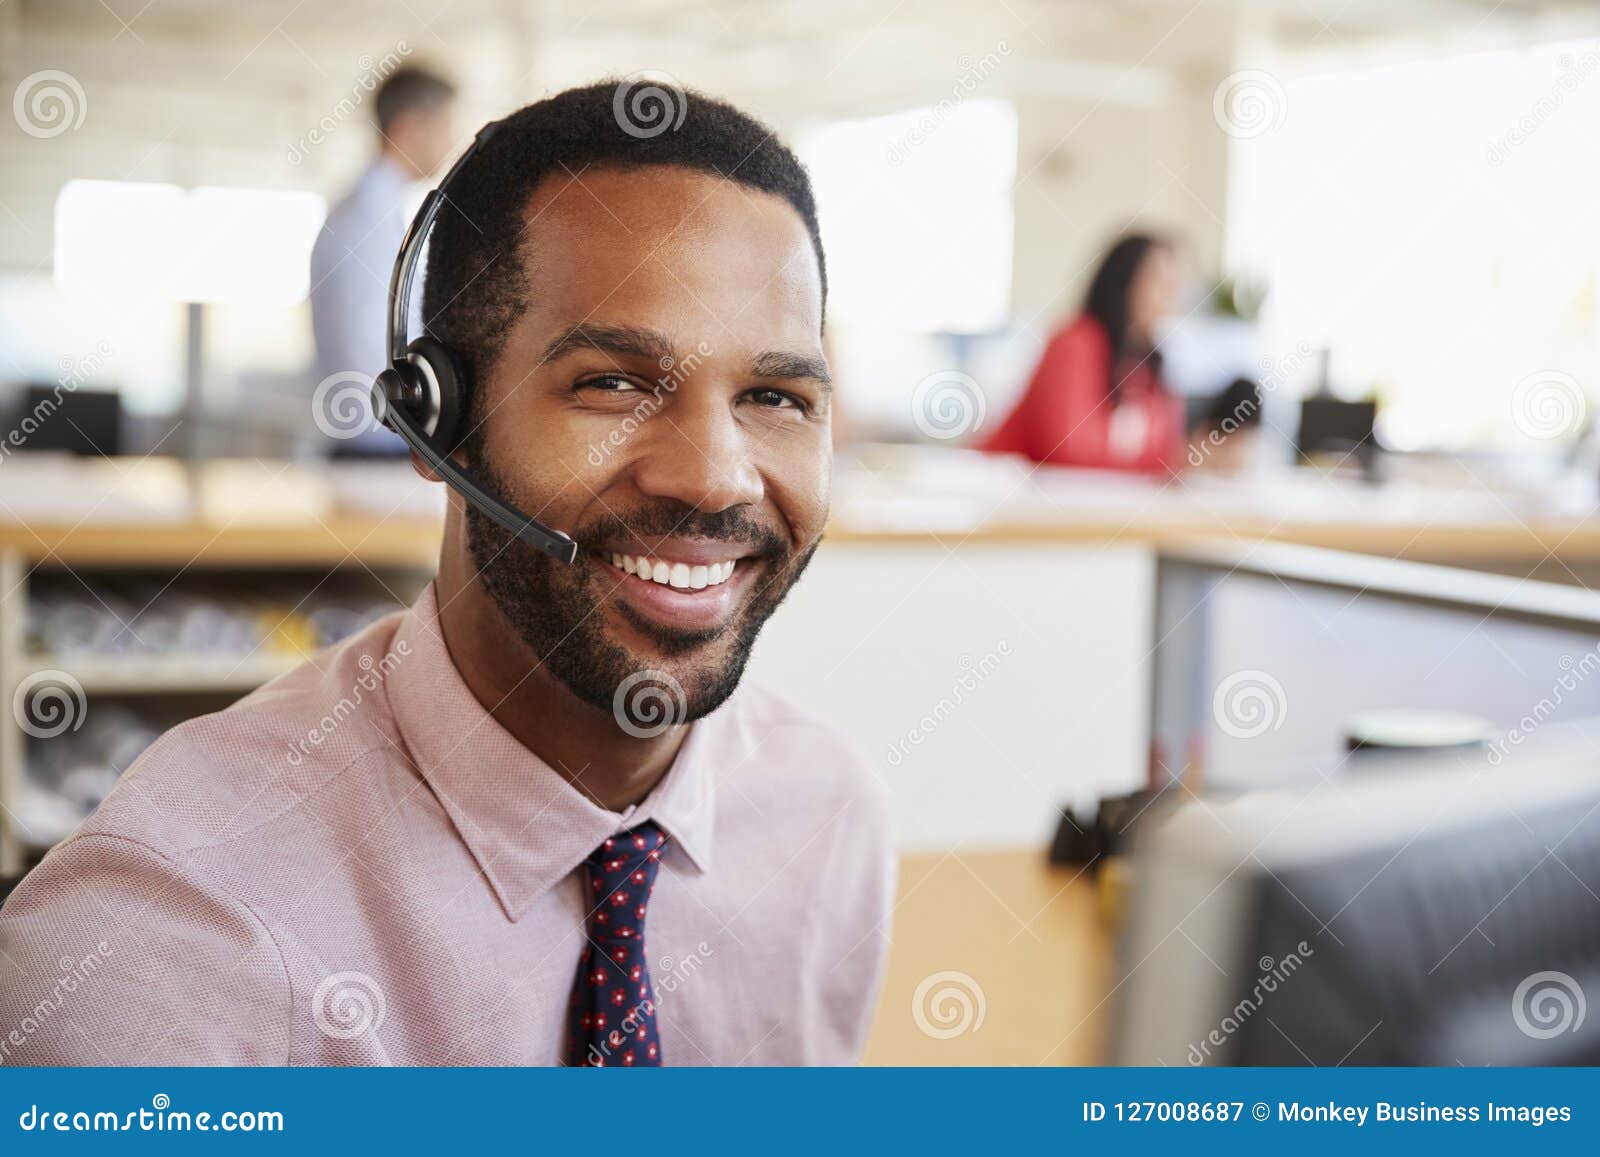 man working in a call centre smiling to camera, close-up